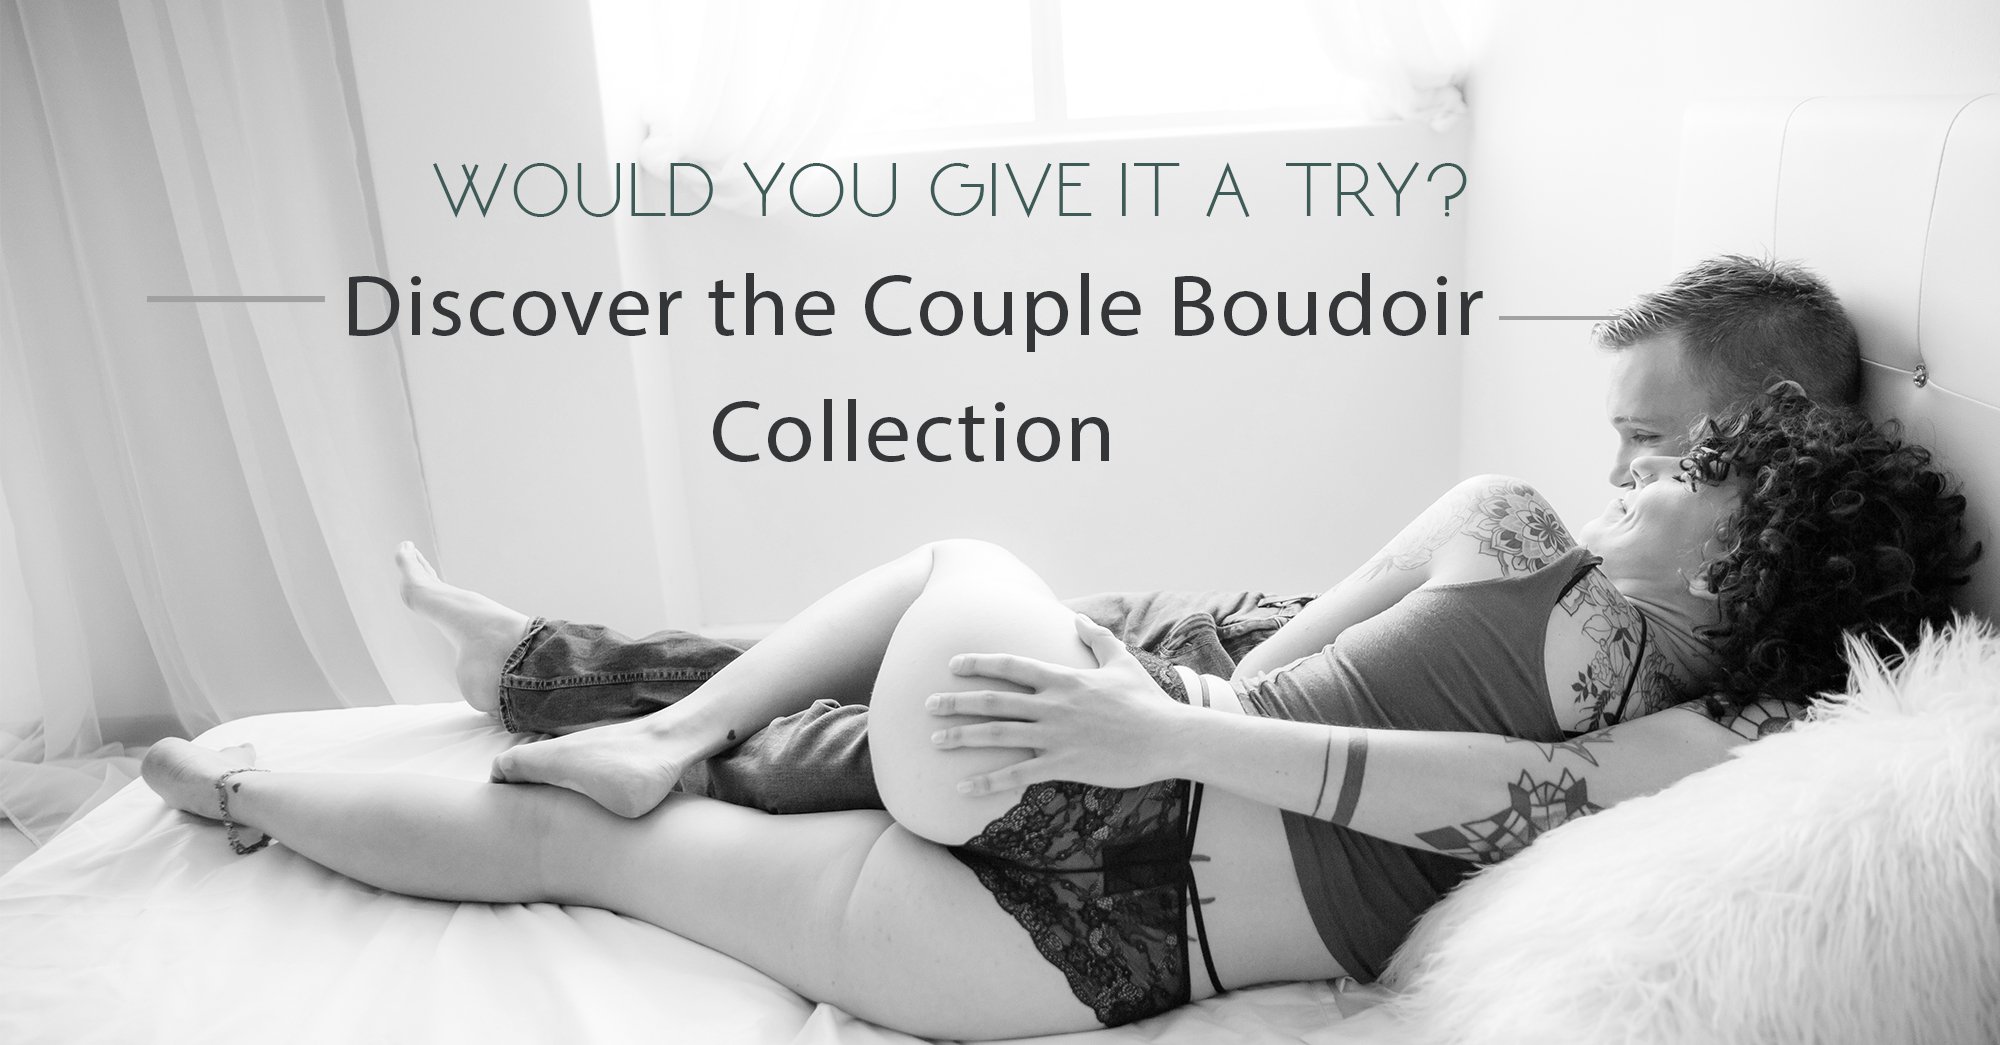 This is BADASS!! Couple Boudoir is the INTHING! (copy)